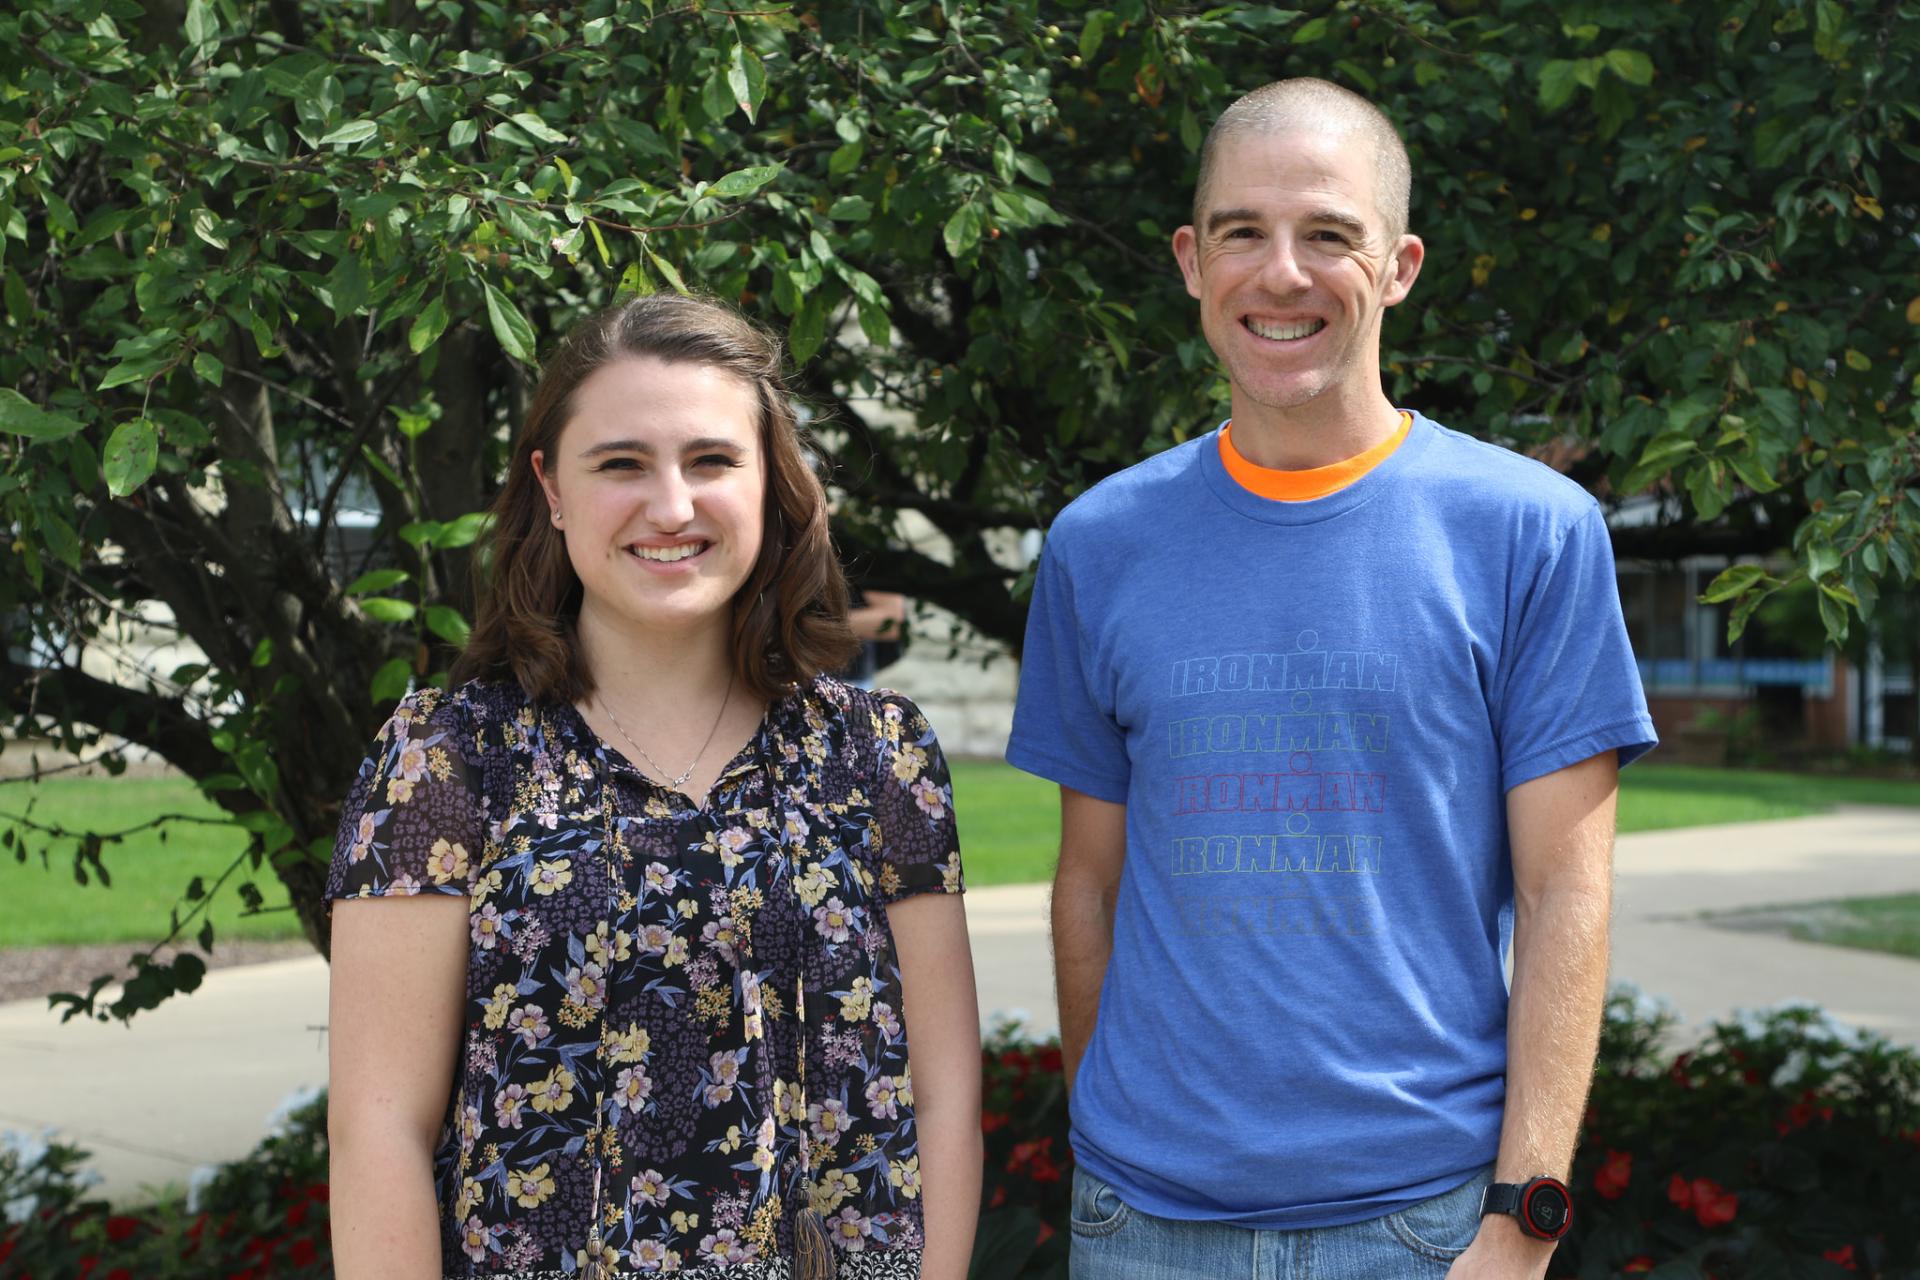 Allyson Hahn and Neil Nicholson posing together after working together on a summer research project on mathematics.